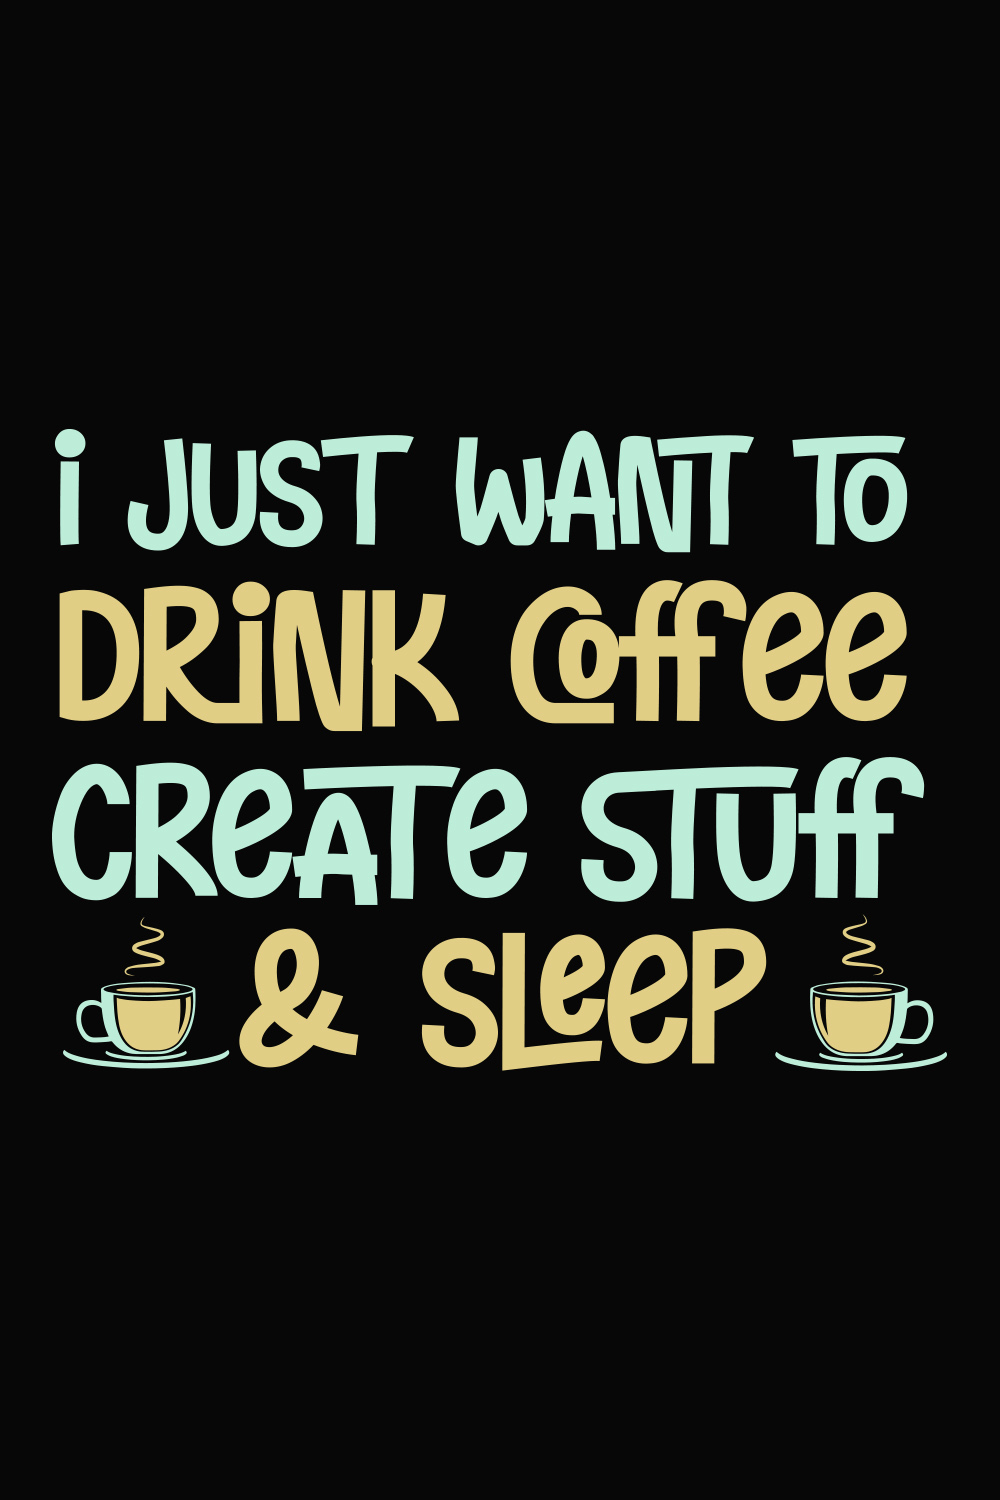 I Just Want To Drink Coffee Create Stuff And Sleep Shirt pinterest image.